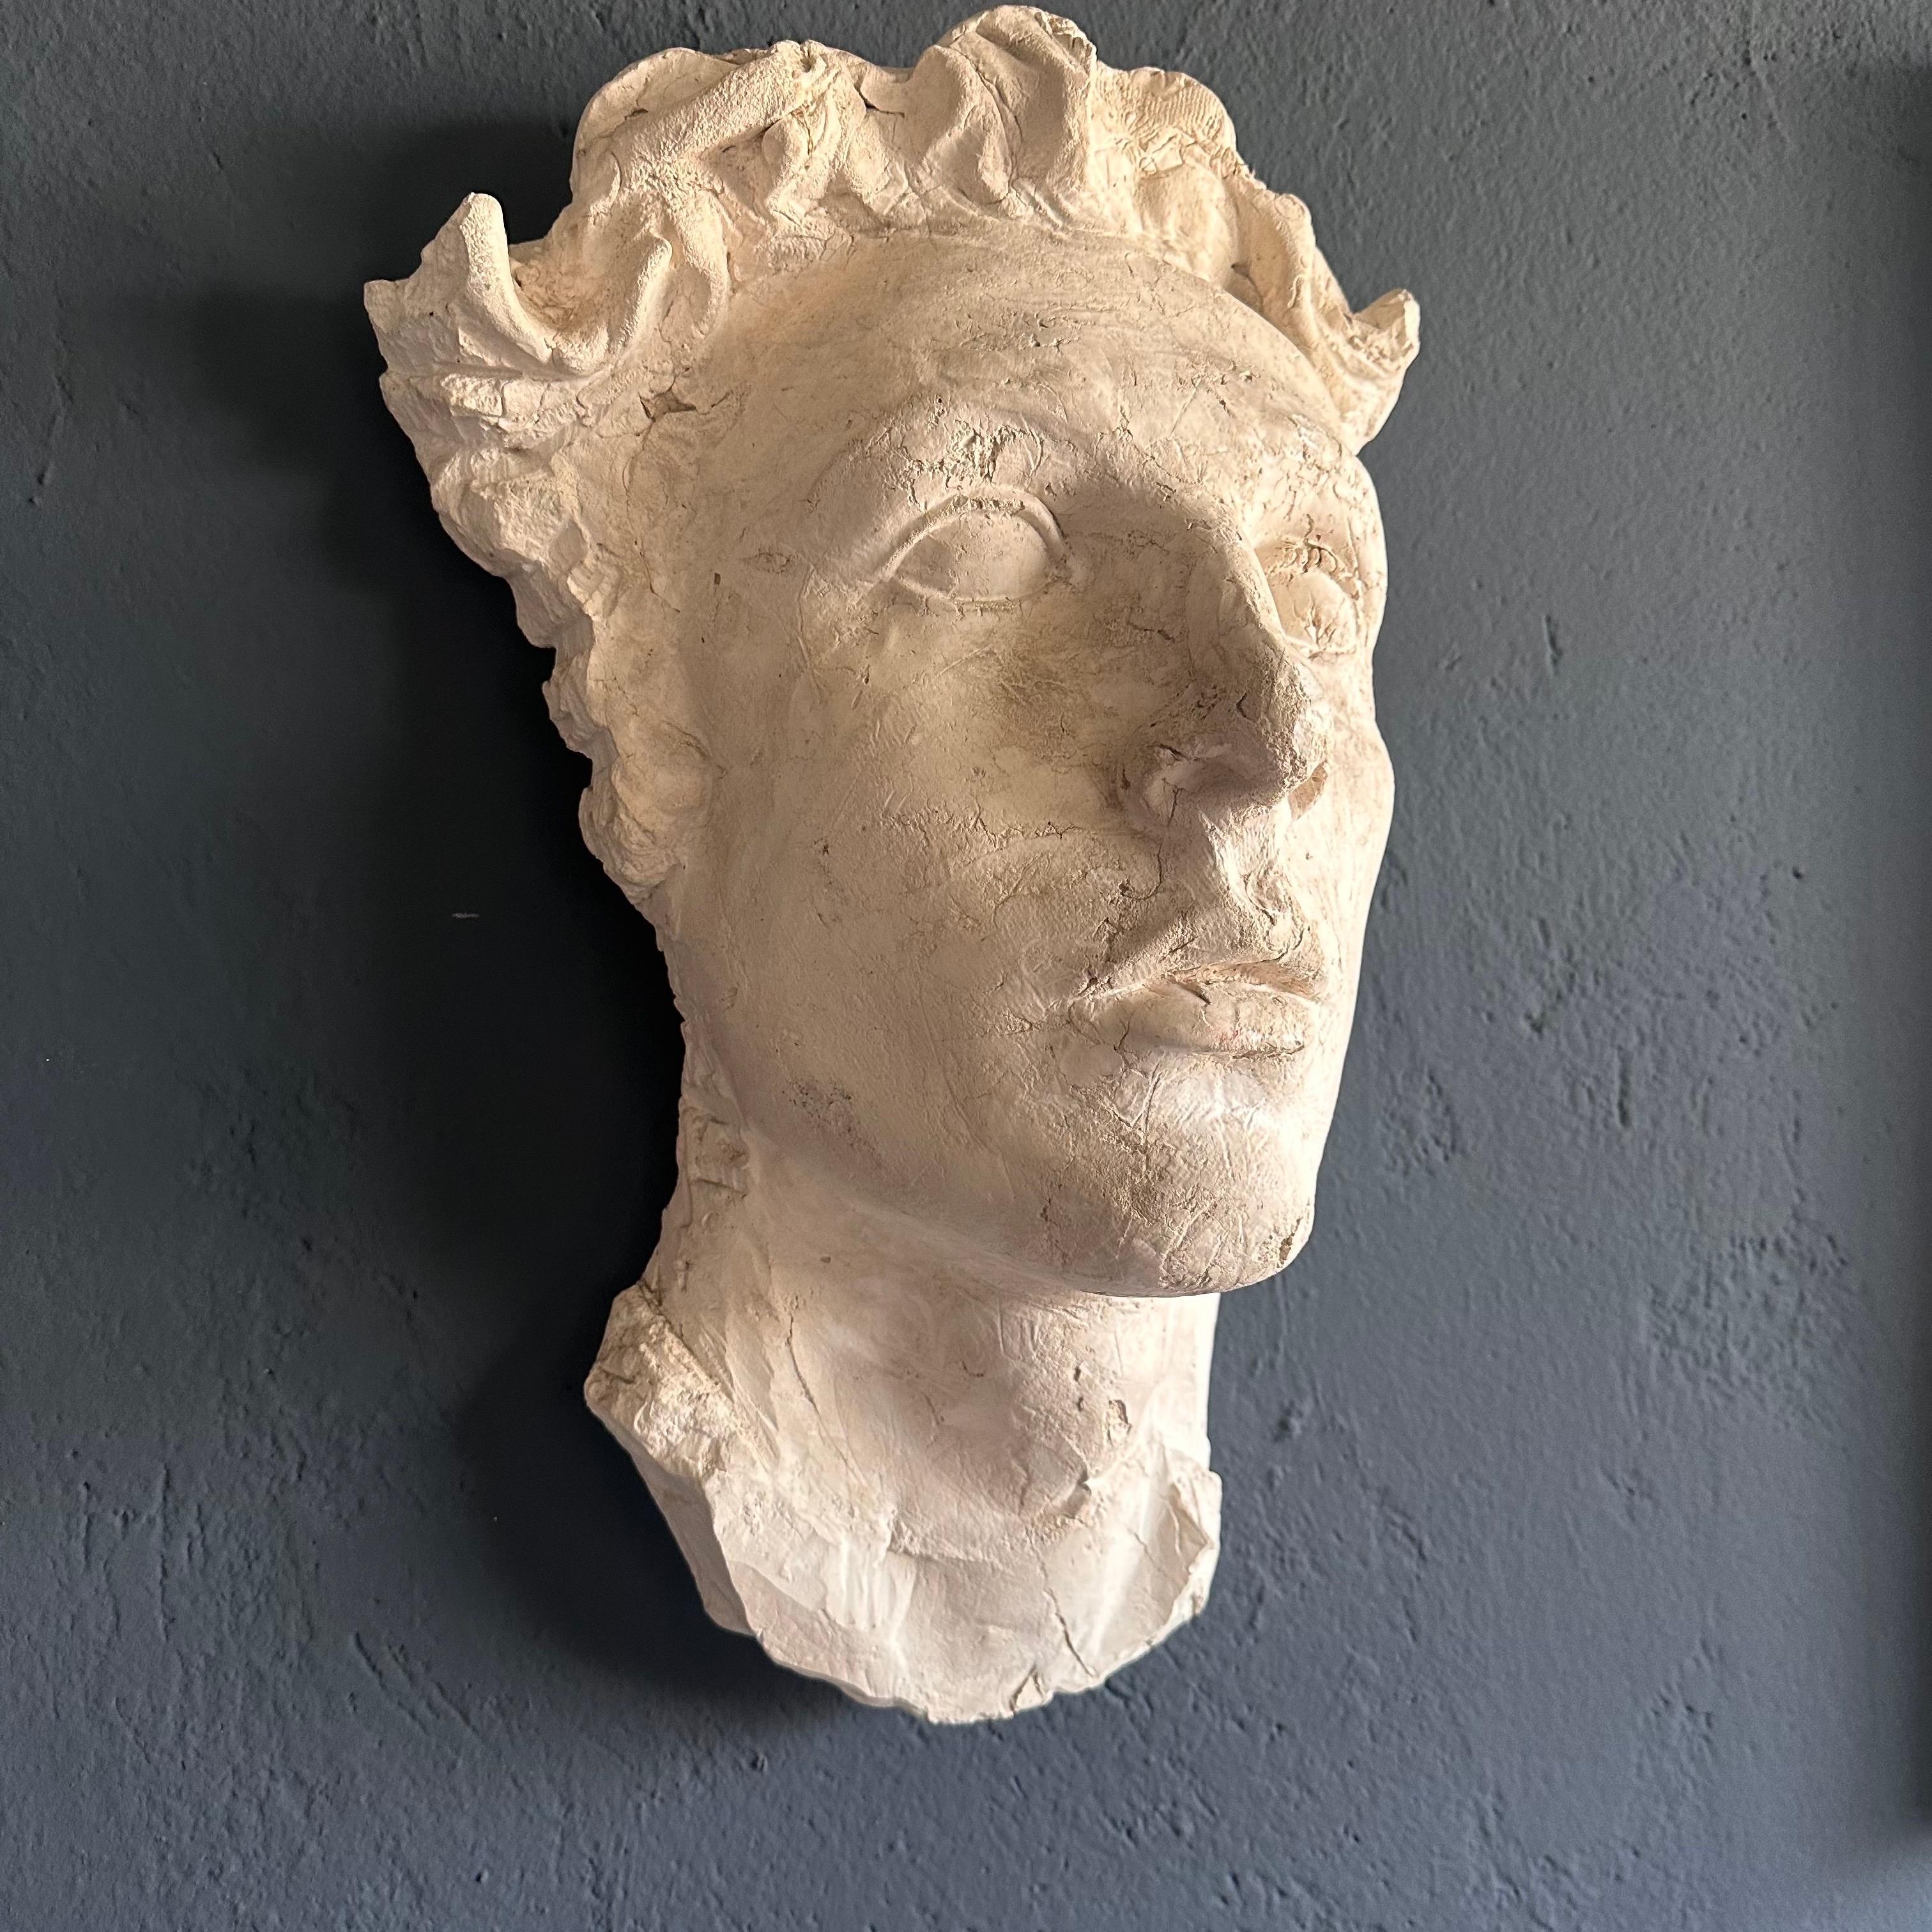 Hand-Crafted Stunning Decorative Roman Gypsum Face, 1970s Reproduction For Sale